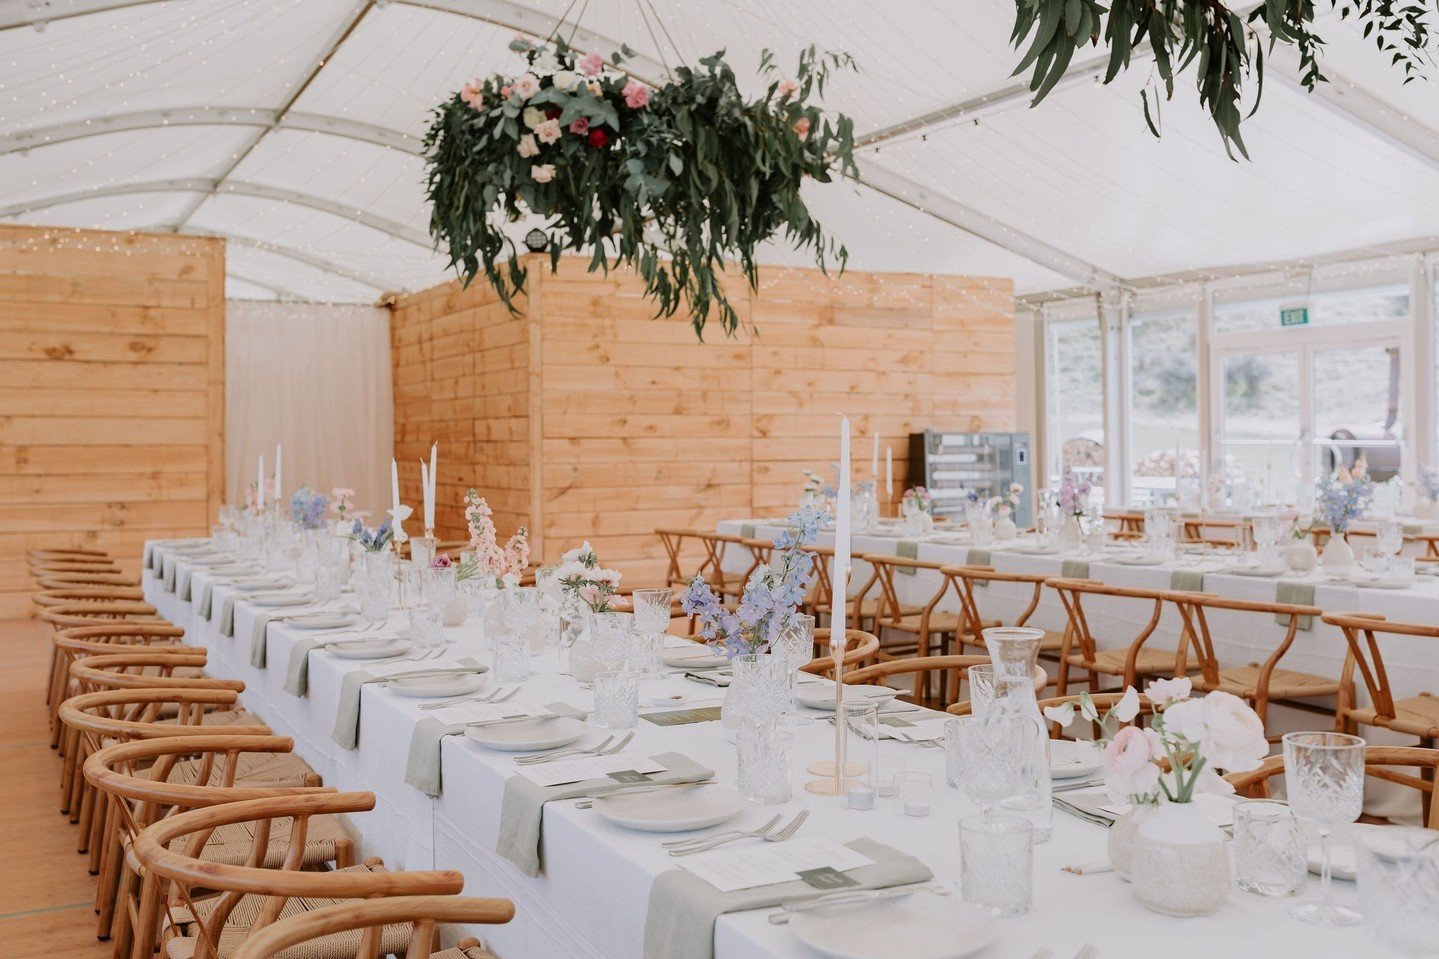 Did you know?... The Lake June marquee is divided in half by movable timber walls, creating two unique spaces that can be set up to your own vision and adjusted to suit your group size. ⁠
⁠
On one side is the is the Lake June dining room that feature